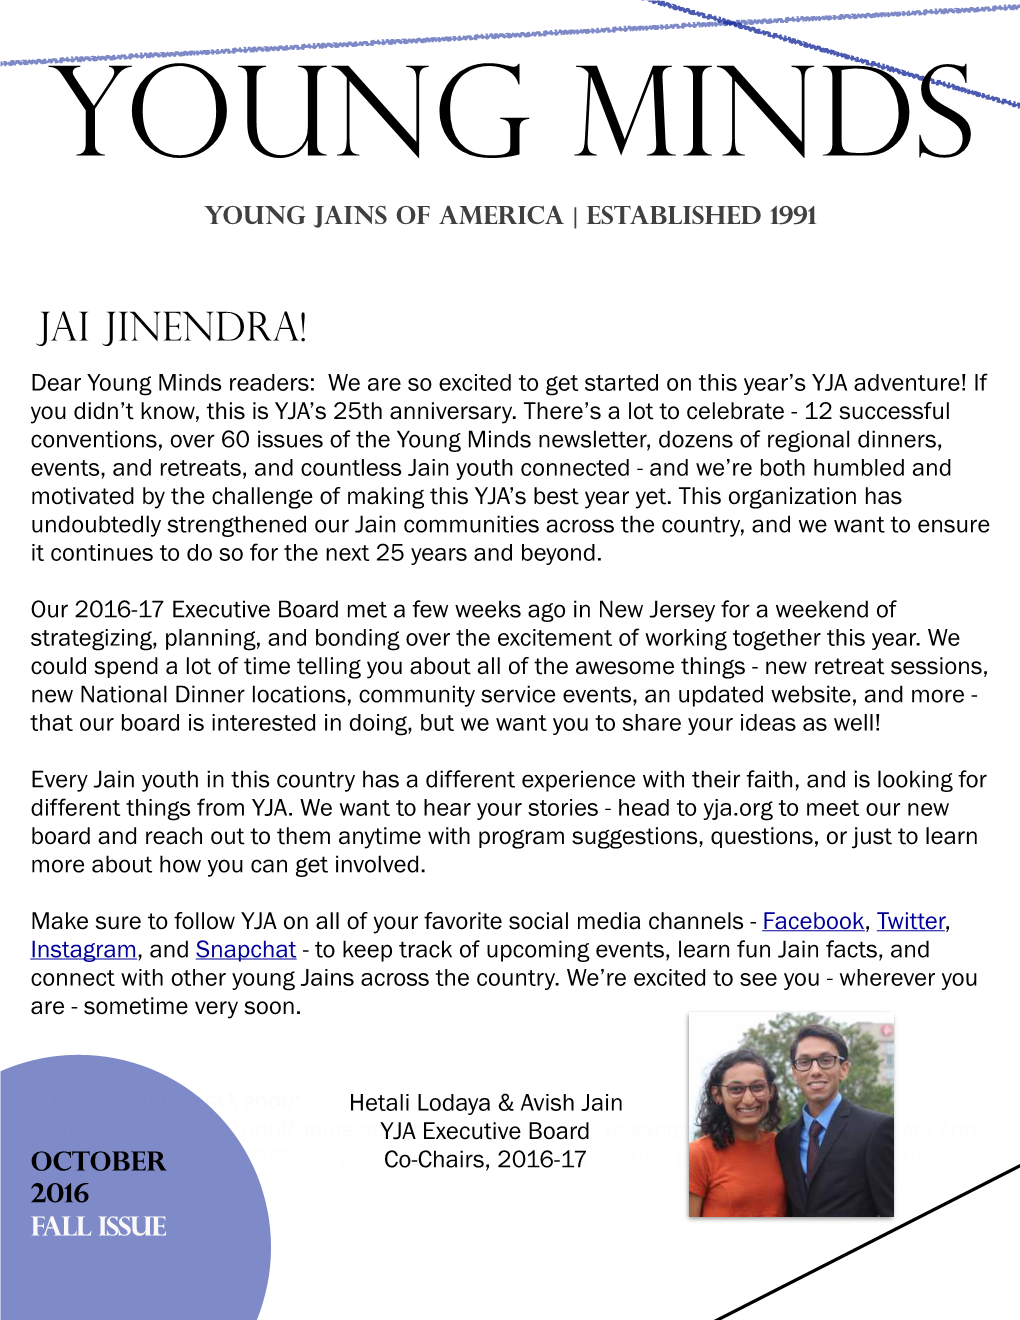 Jai Jinendra! Dear Young Minds Readers: We Are So Excited to Get Started on This Year’S YJA Adventure! If You Didn’T Know, This Is YJA’S 25Th Anniversary